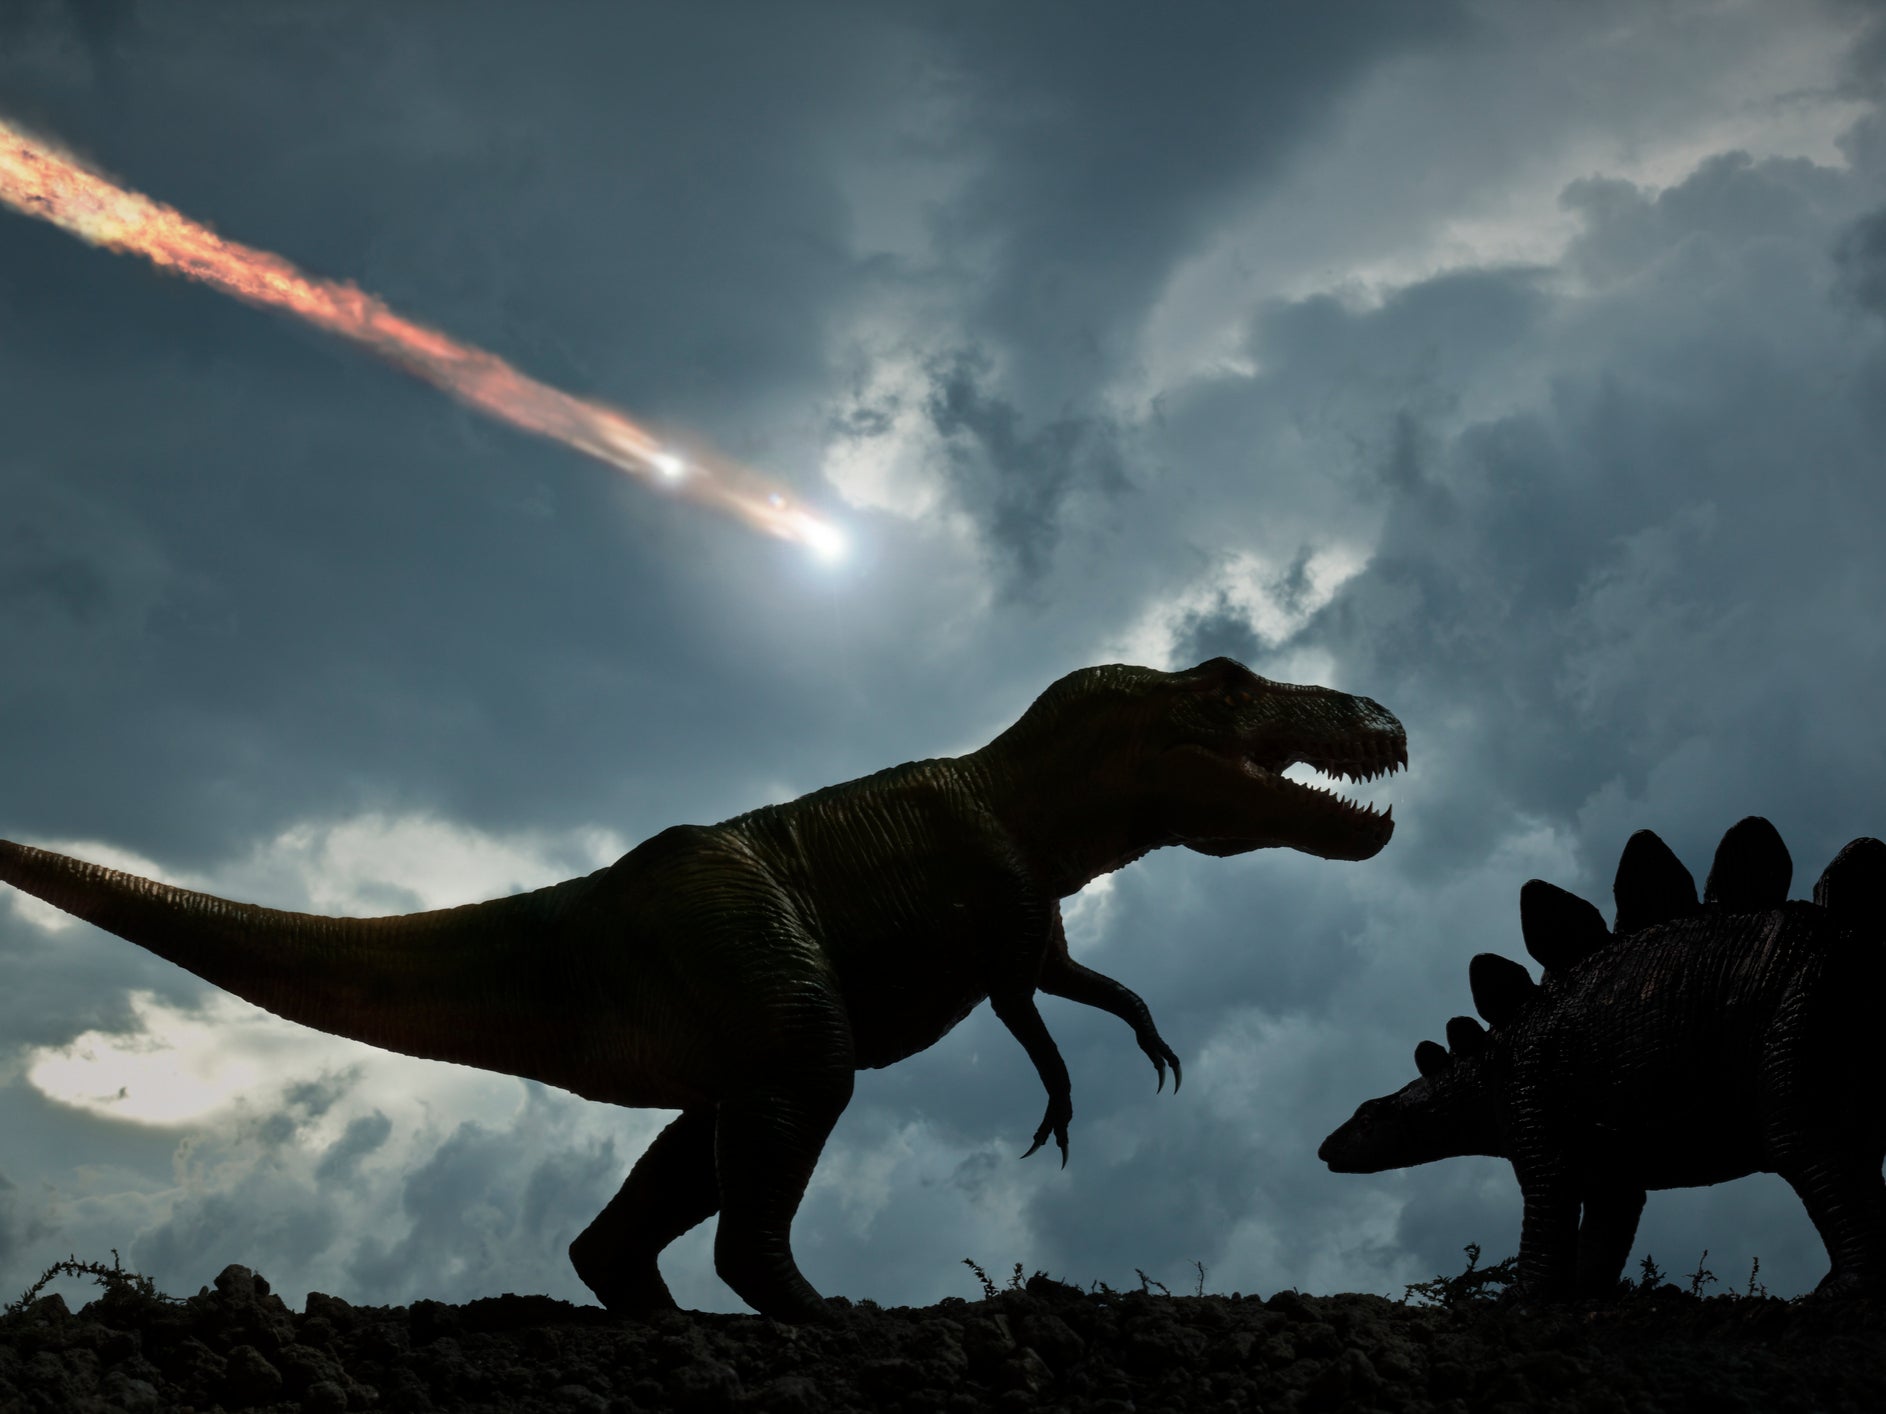 Dinosaurs may have been in their prime when the asteroid struck, new research suggests